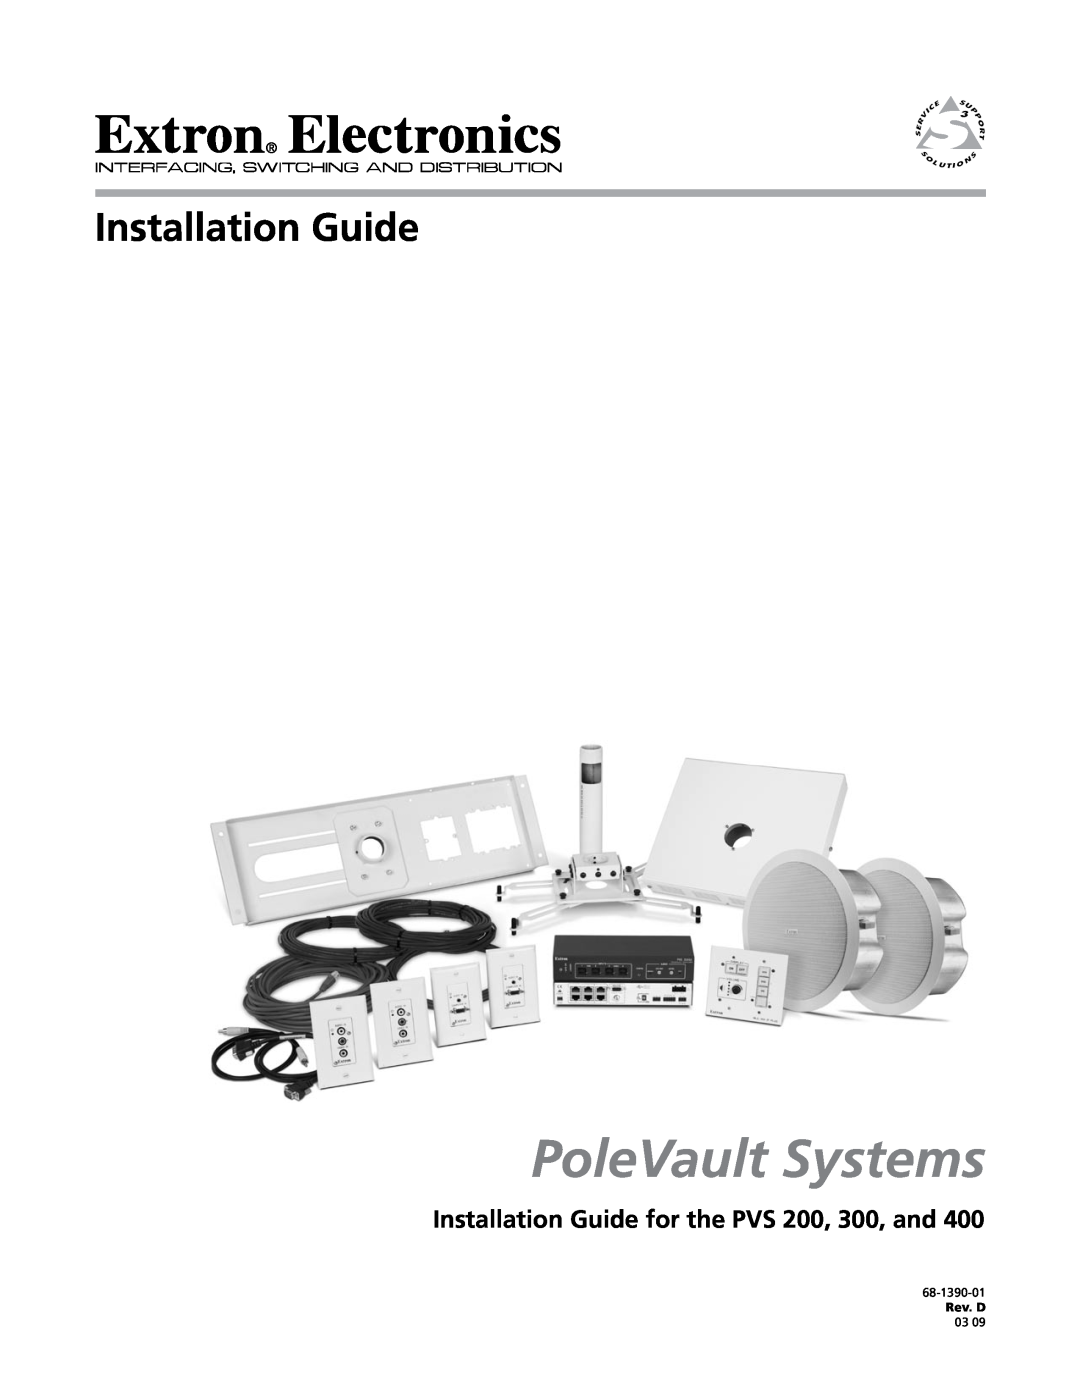 Extron electronic PVS 400 manual Installation Guide for the PVS 200, 300, and, PoleVault Systems, 68-1390-01, Rev. C 